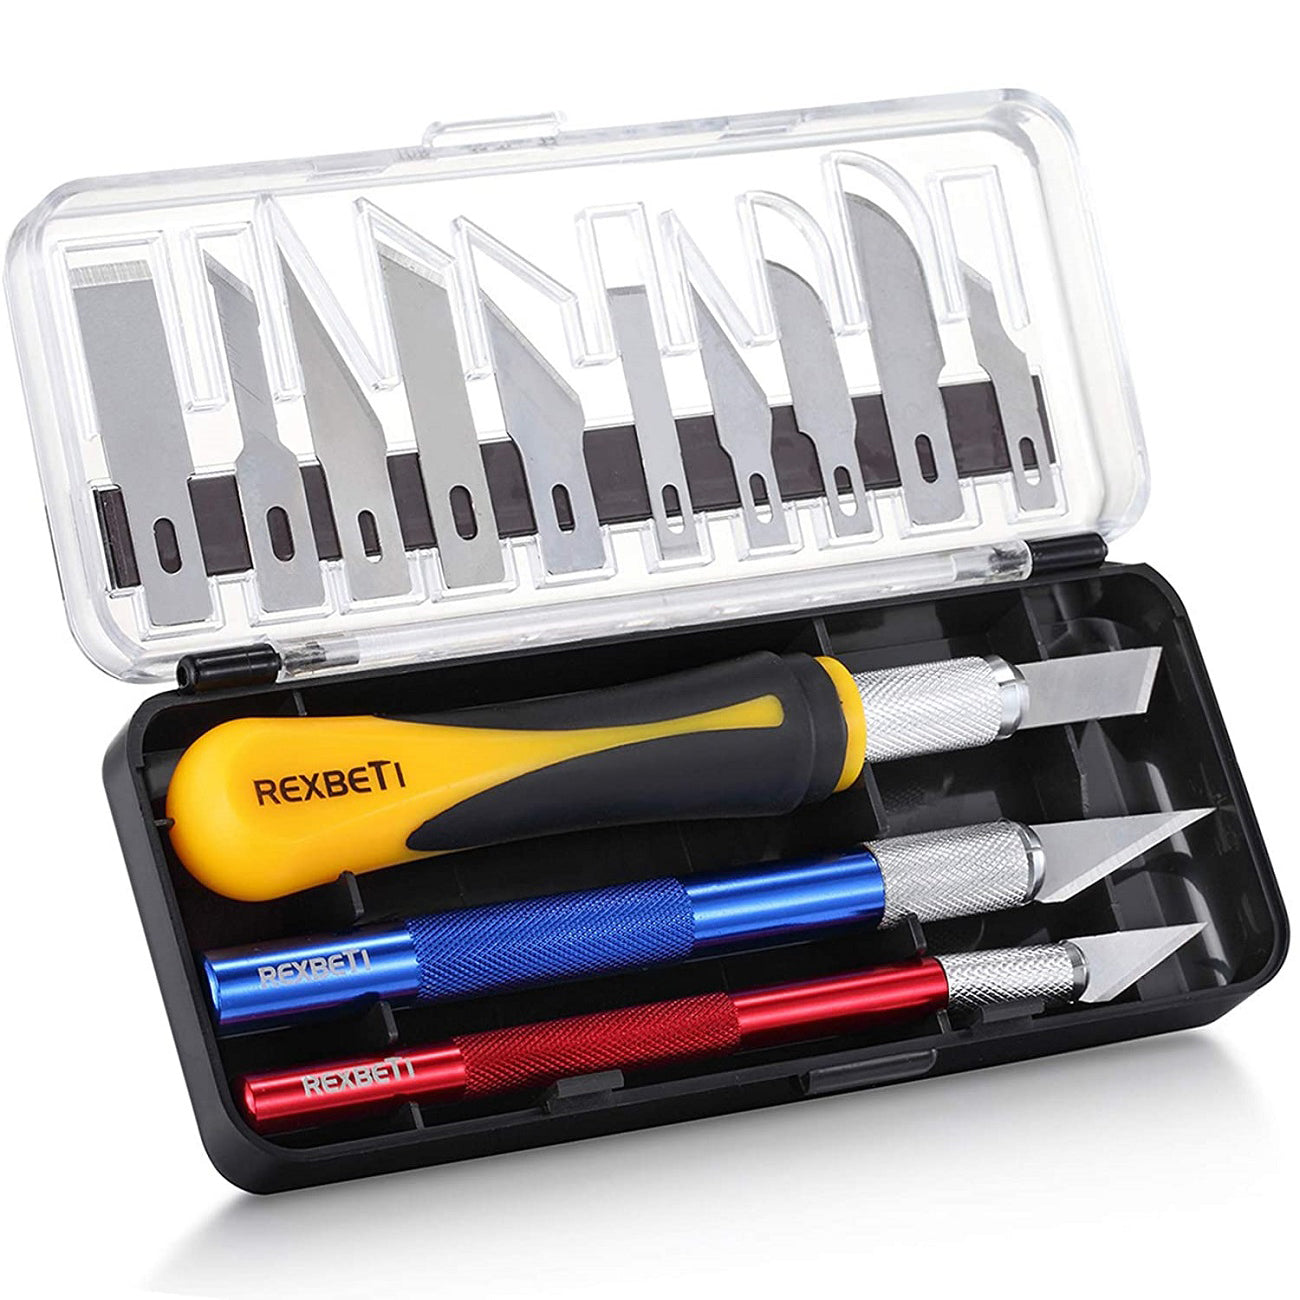 16 Piece Hobby Craft Knife Set 13 knives & 3 Handles In Storage Box to cut  cardboard paper plastic cloth foam leather hobby craft project